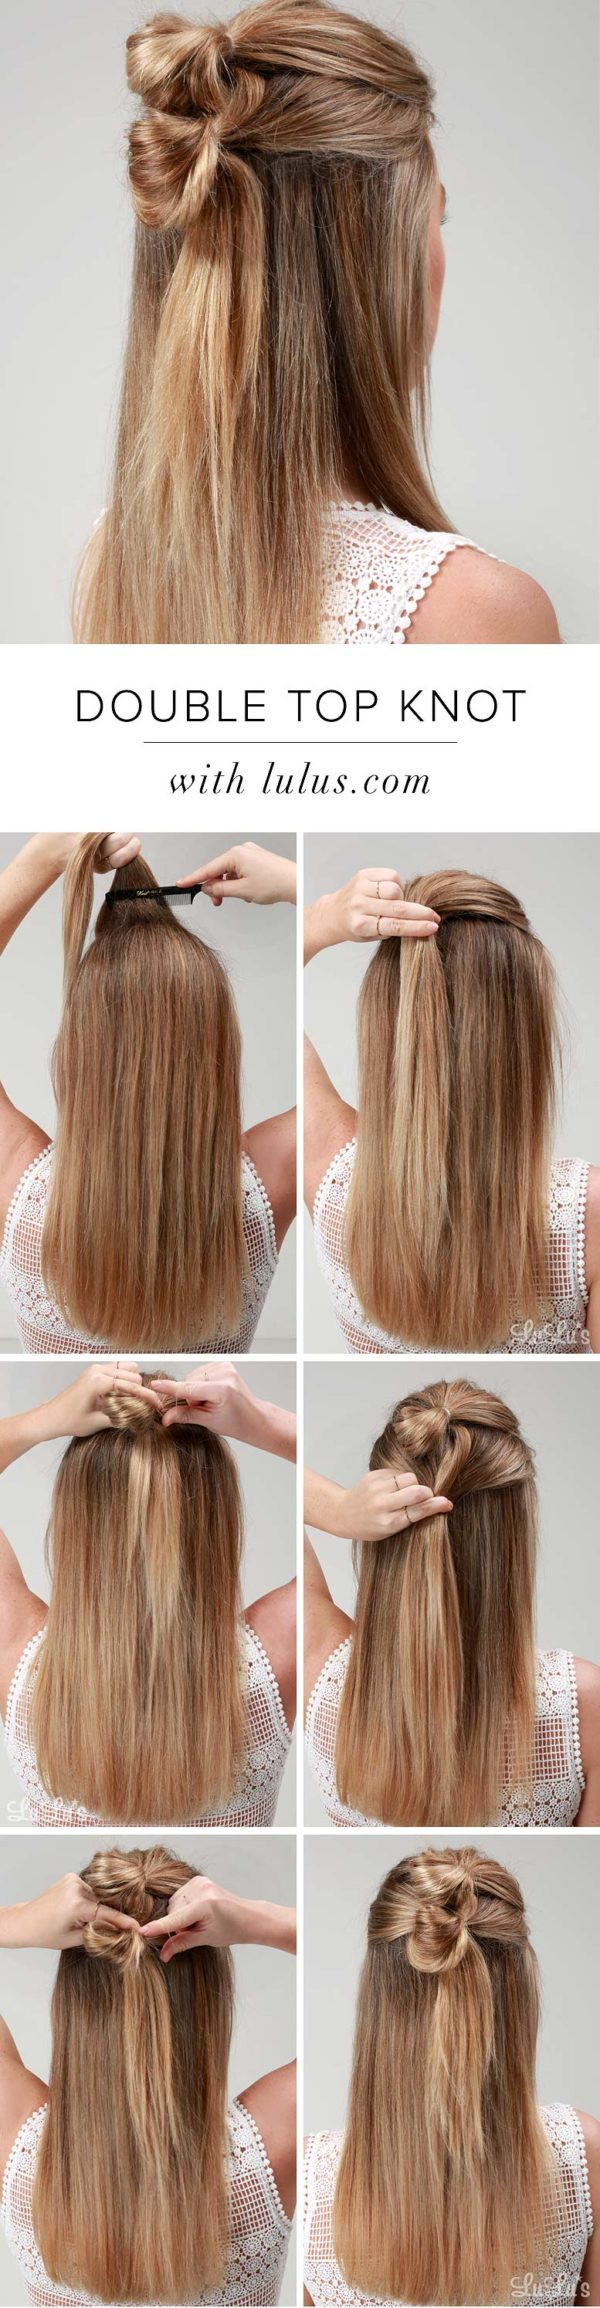 Easy Hairstyle Steps
 Easy Step By Step Hairstyle Tutorials You Can Do For Less